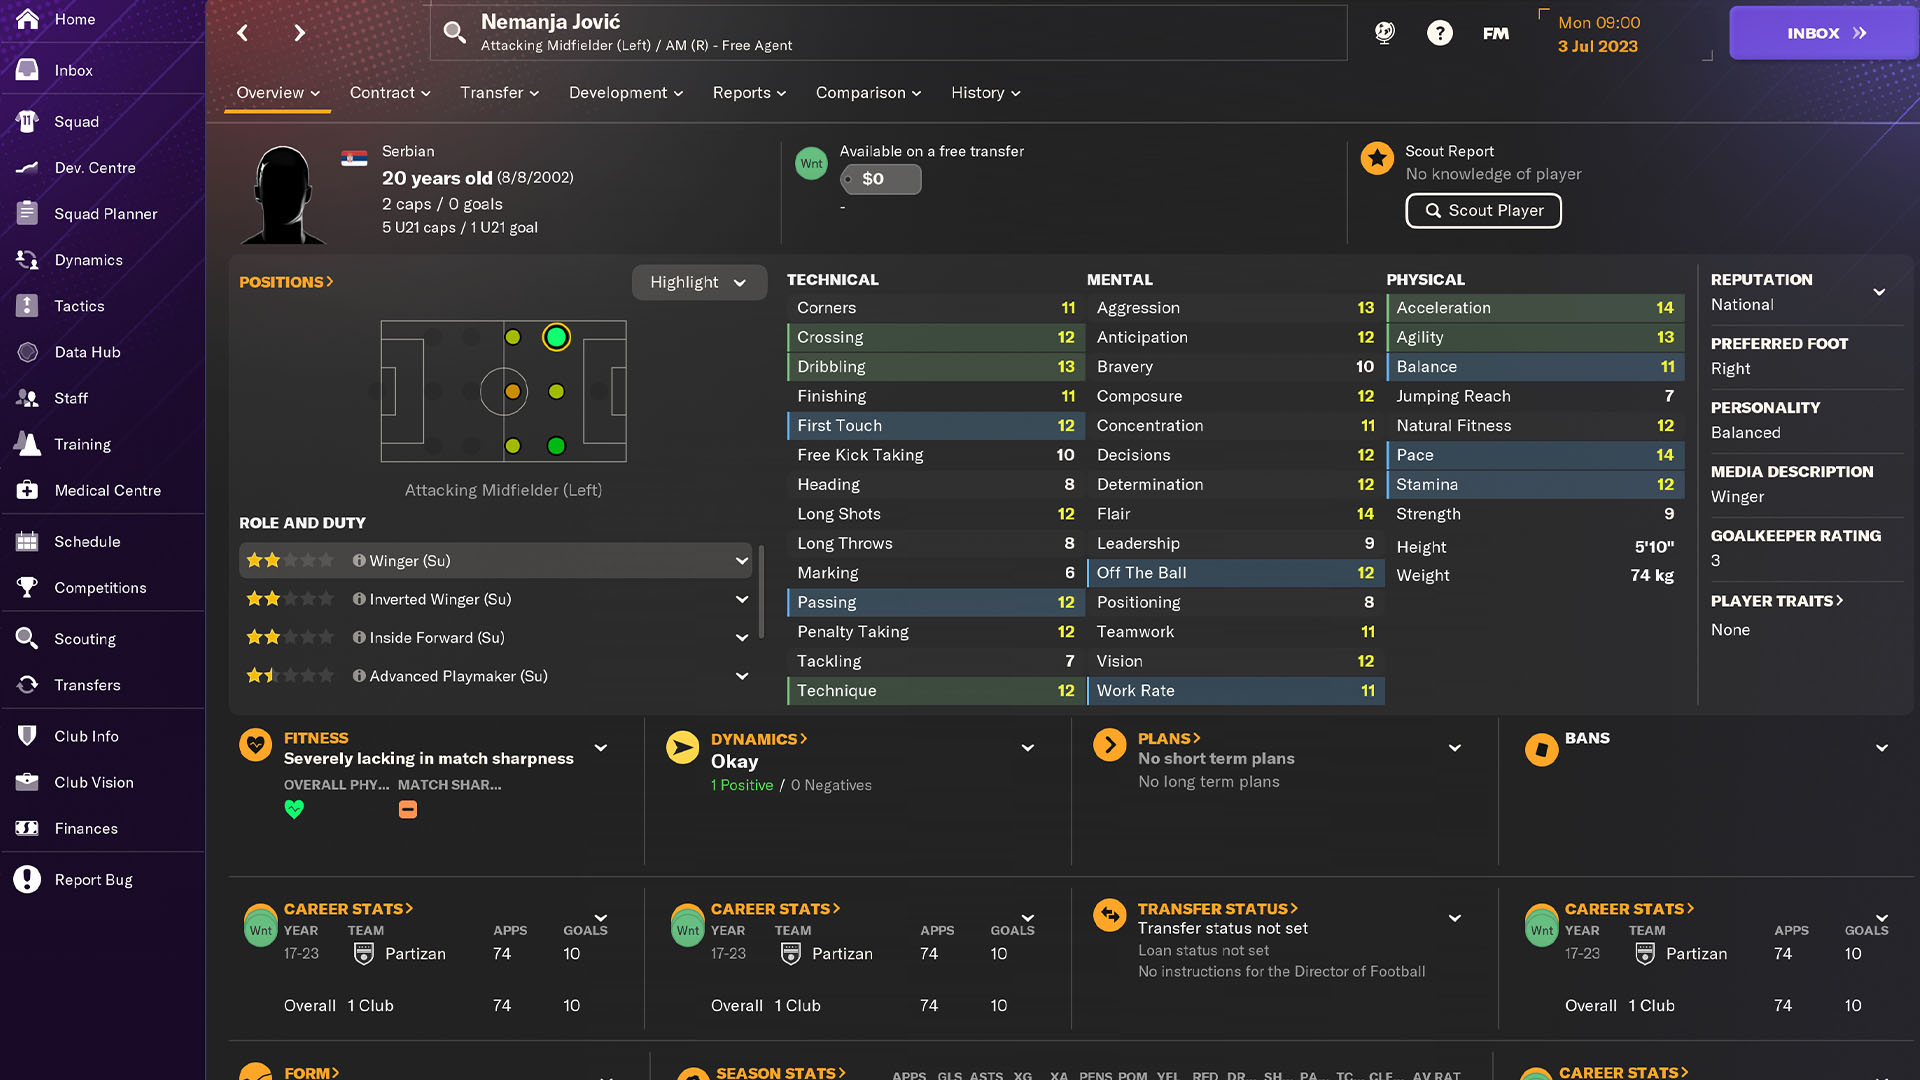 Best Free Agents to Sign in Football Manager 2024